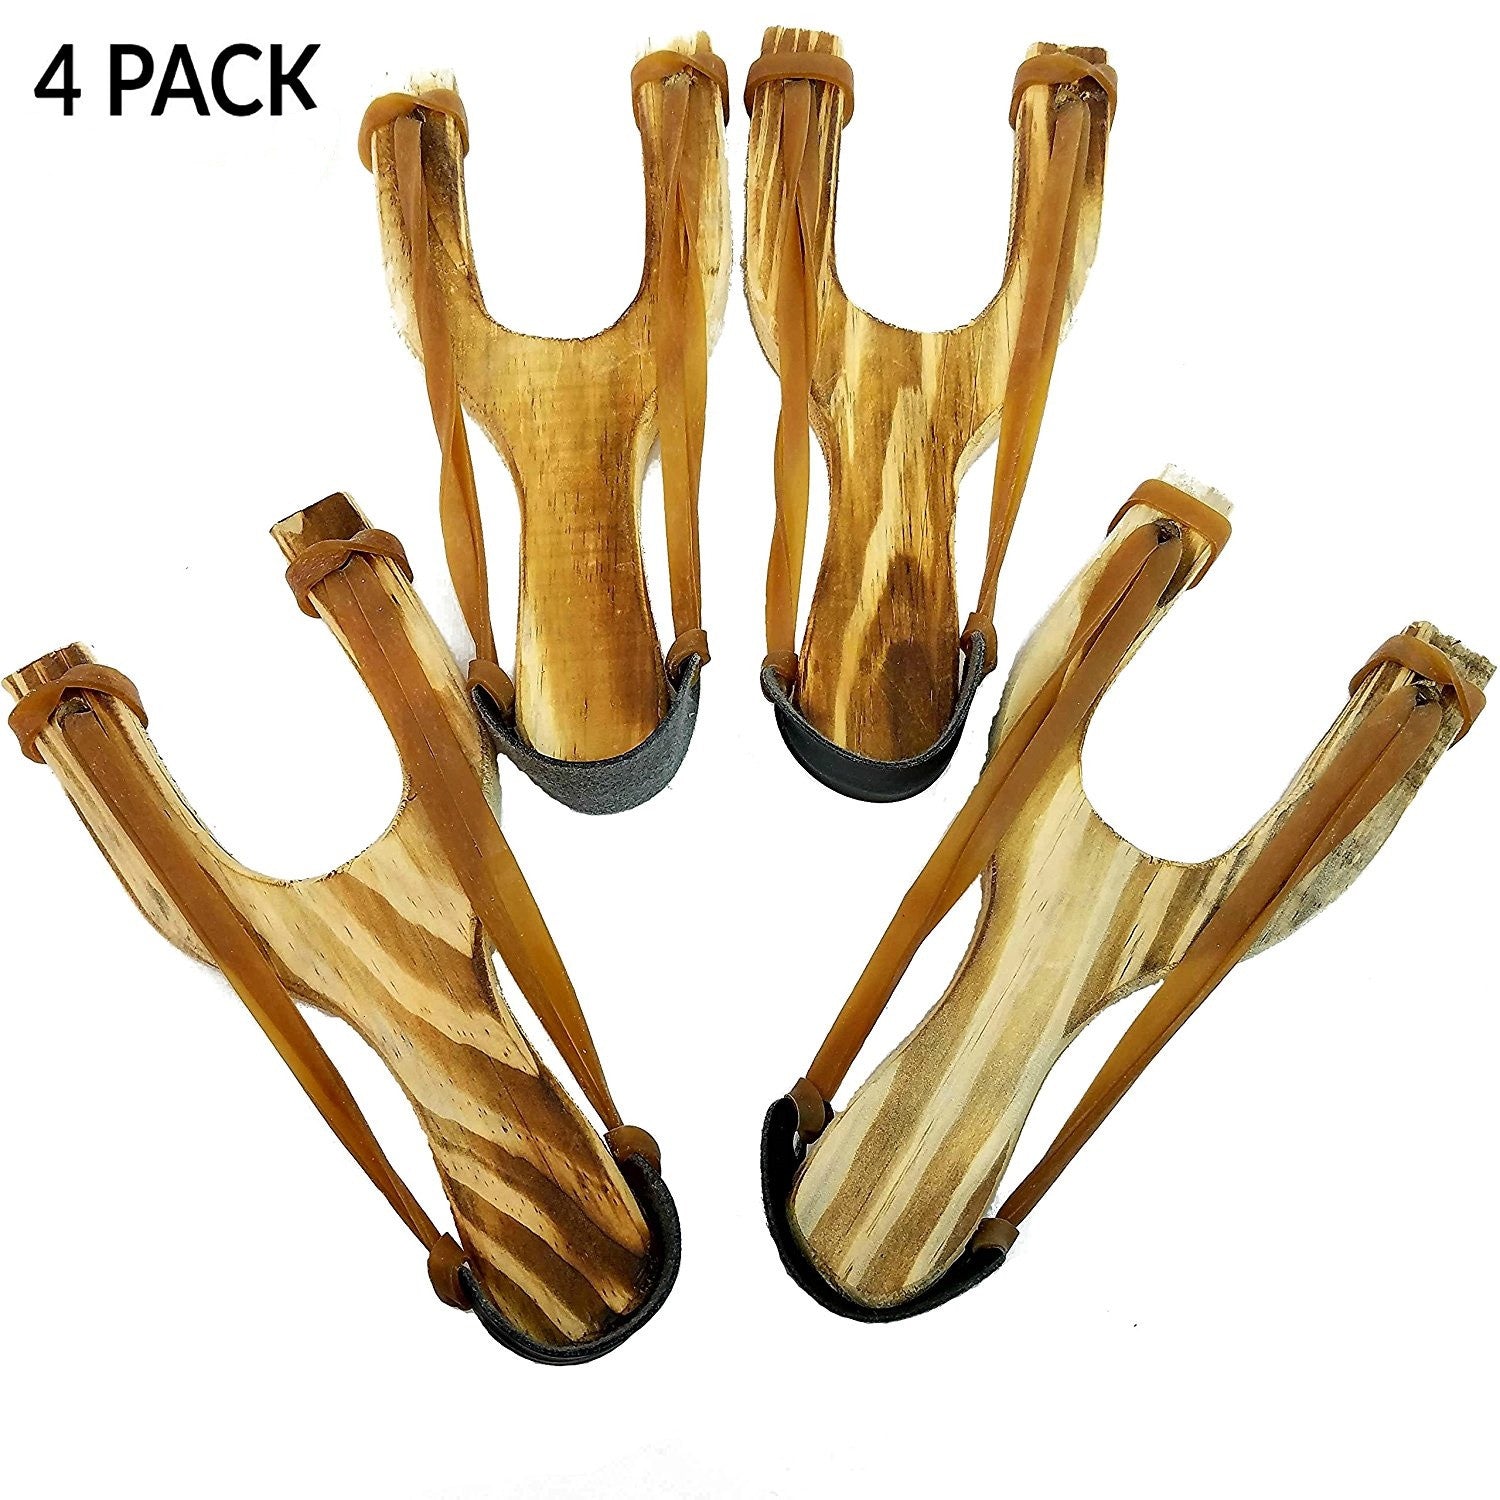 Hand Carved Burnt Wood Toy Launchers 4-Pack